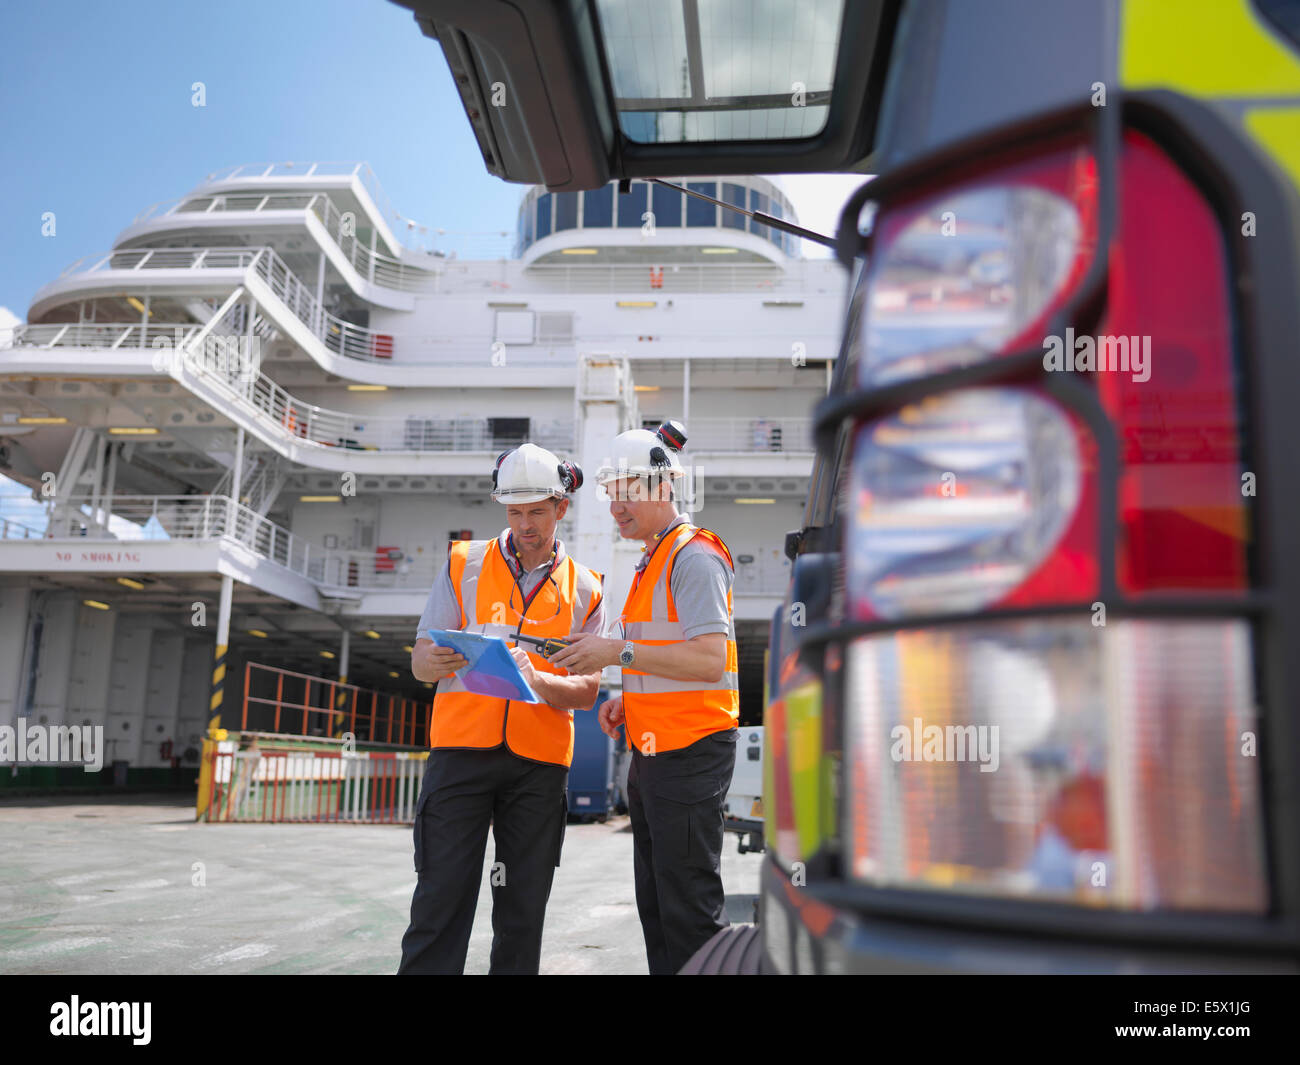 Loading workers on deck of ferry Stock Photo